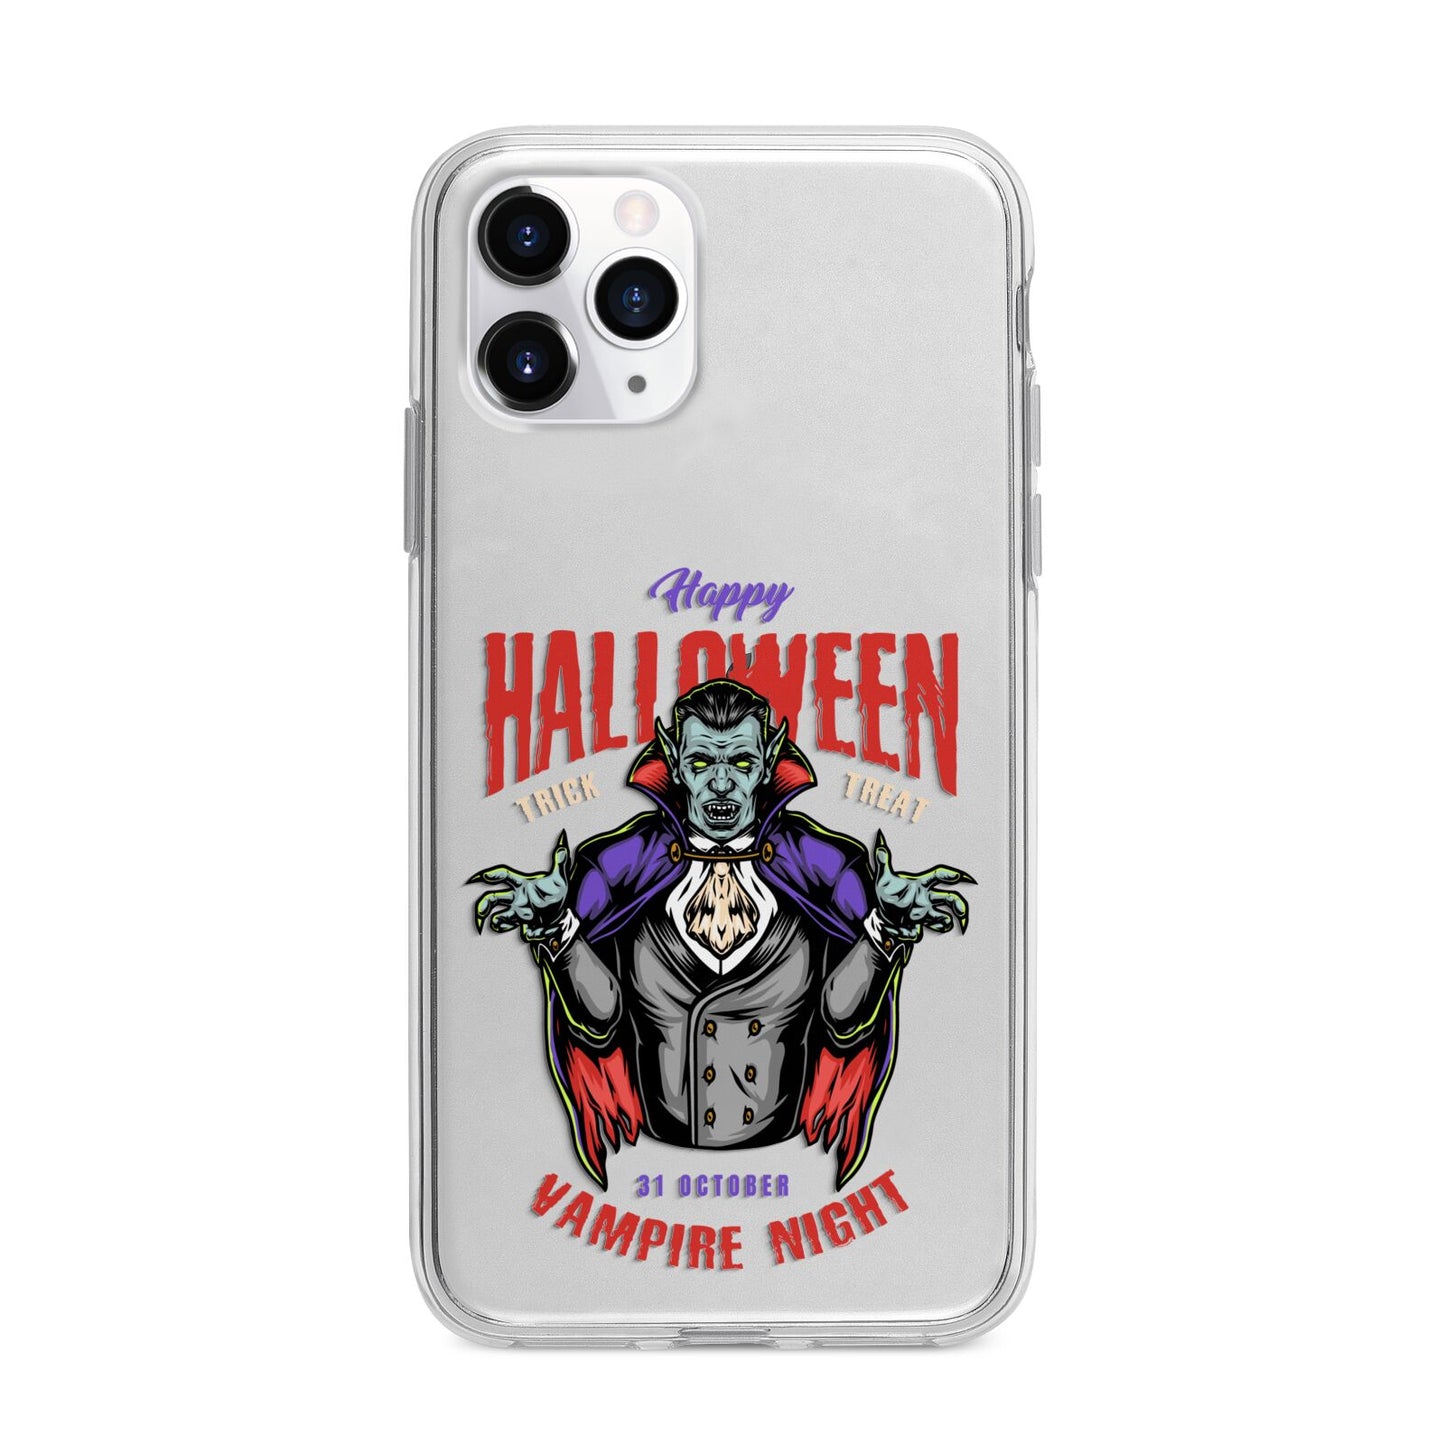 Vampire Night Apple iPhone 11 Pro in Silver with Bumper Case